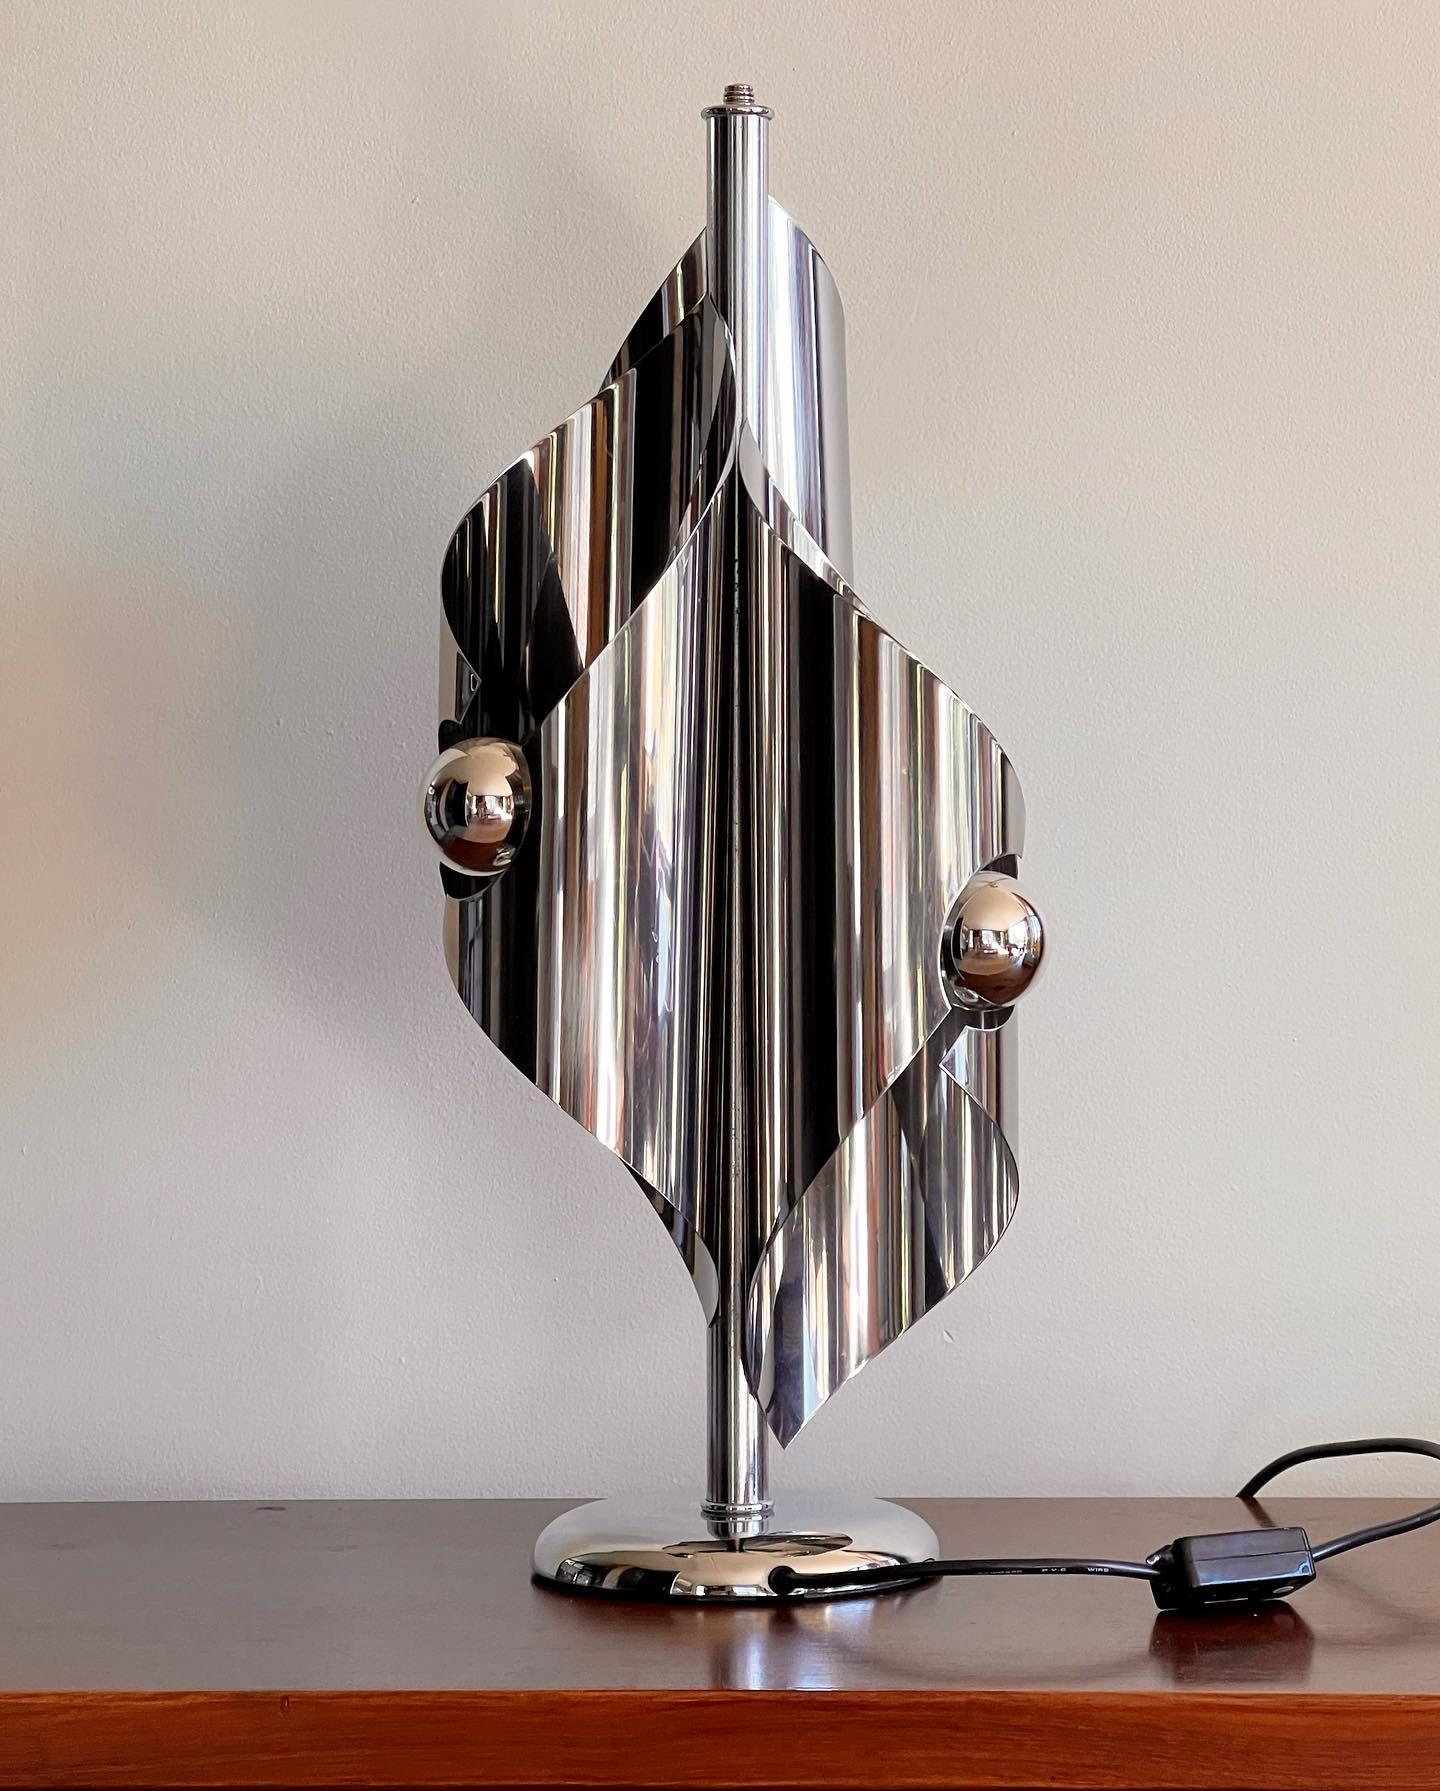 Rare 1970s Folded Chrome Lamp. Its origins can be traced back to both France and Italy. Crafted from polished stainless steel, the light reflects off the chrome surface and diffuses through three cylinders. A functional lamp at night and a